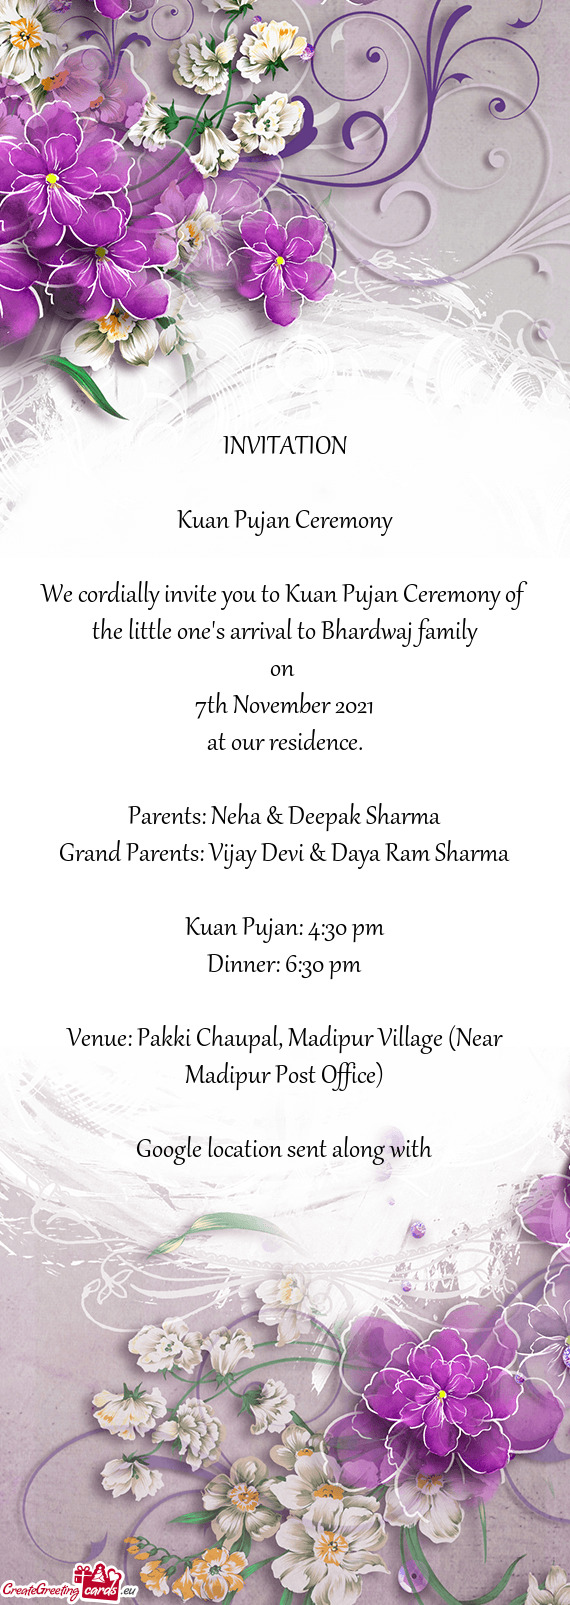 We cordially invite you to Kuan Pujan Ceremony of the little one